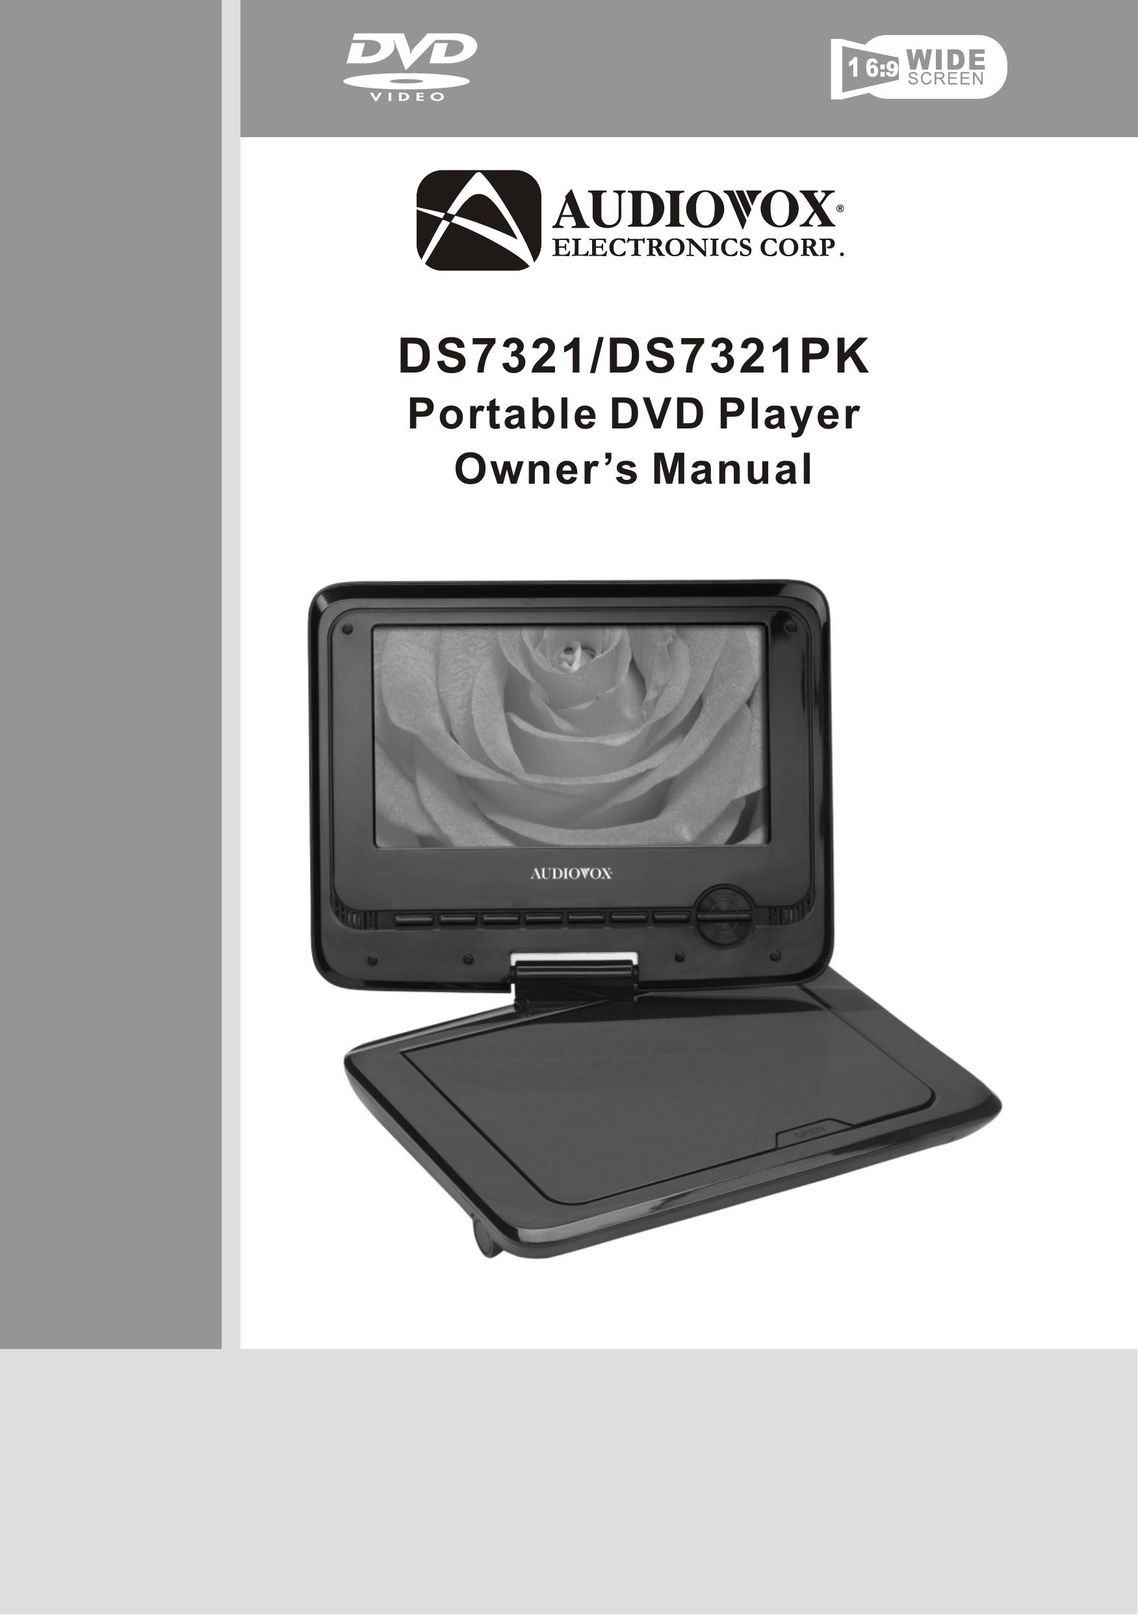 Audiovox DS7321 PK Portable DVD Player User Manual